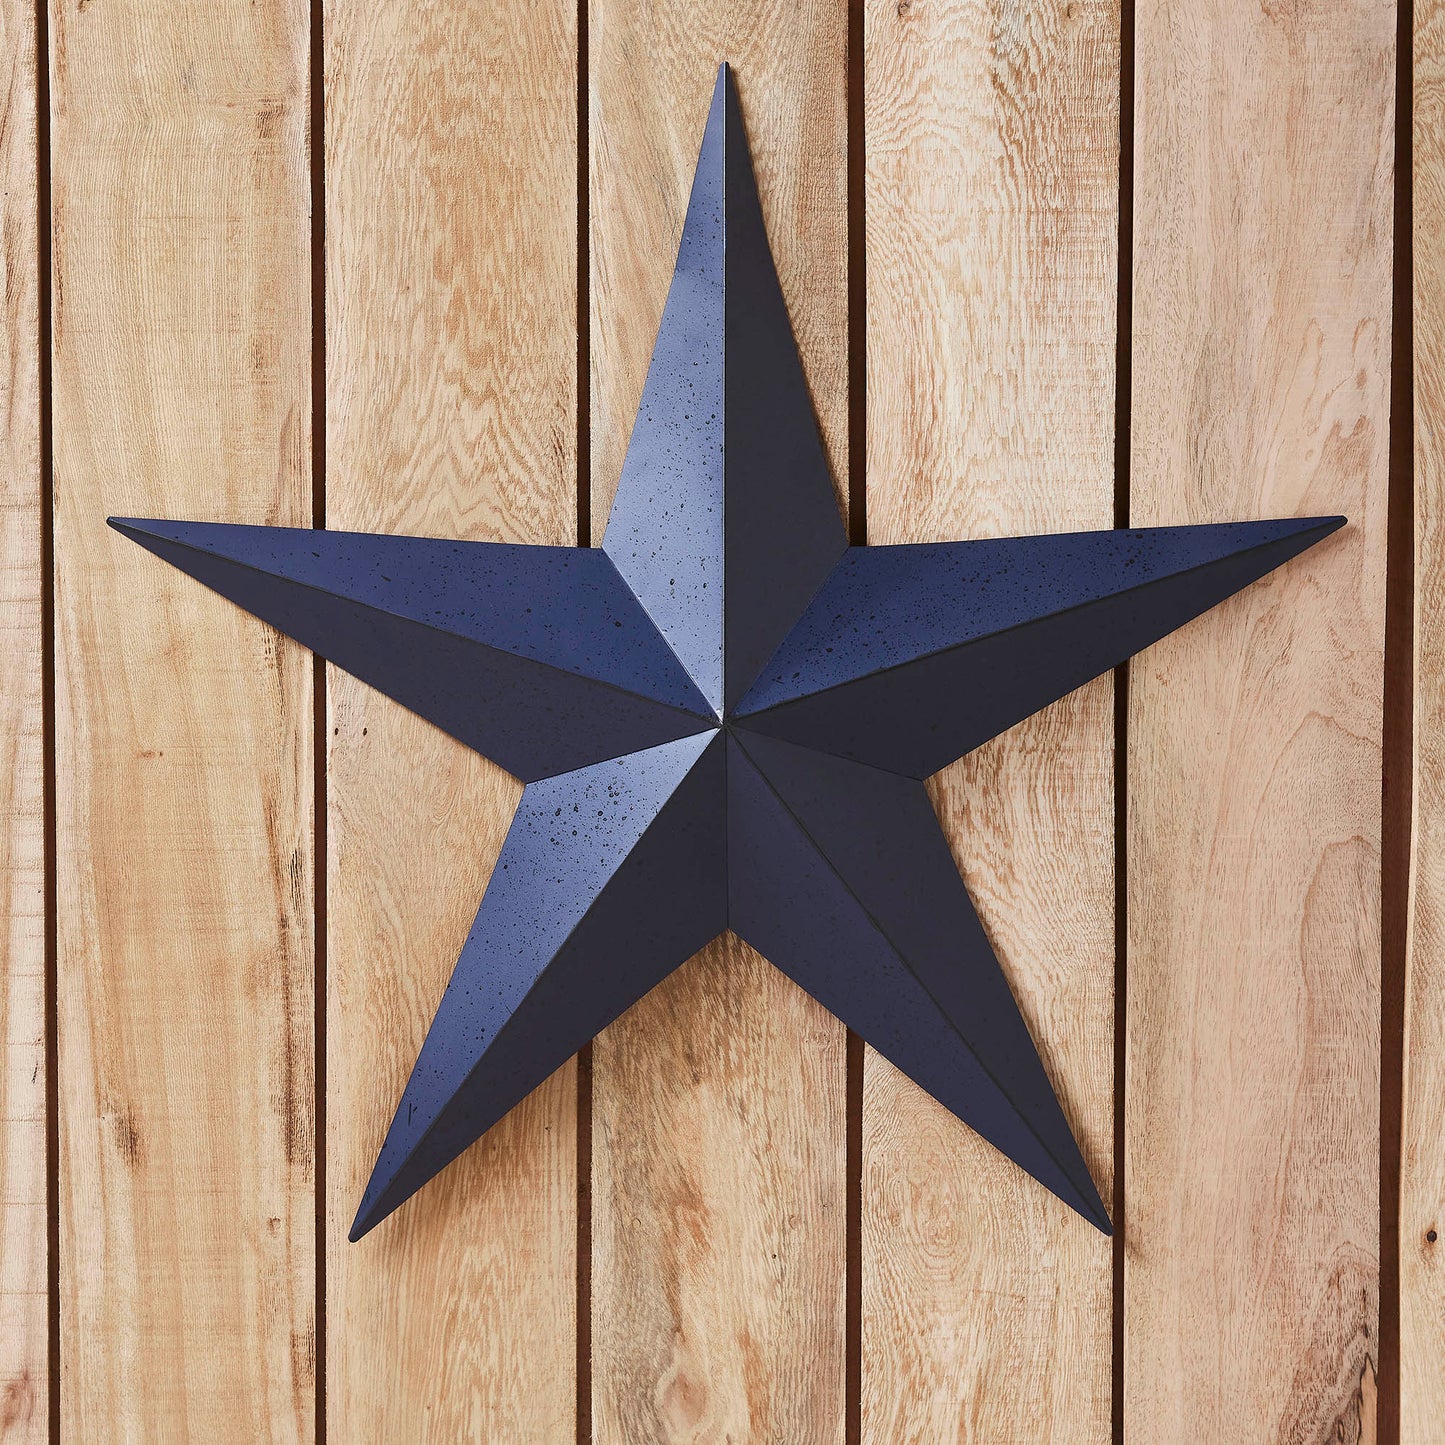 VHC Brands Patriotic Faceted Metal Star Navy Wall Hanging 24x24, Independence Day Decor, American Star Design, Distressed Appearance Metal Wall Hanging,  Star Shape, Country, Navy